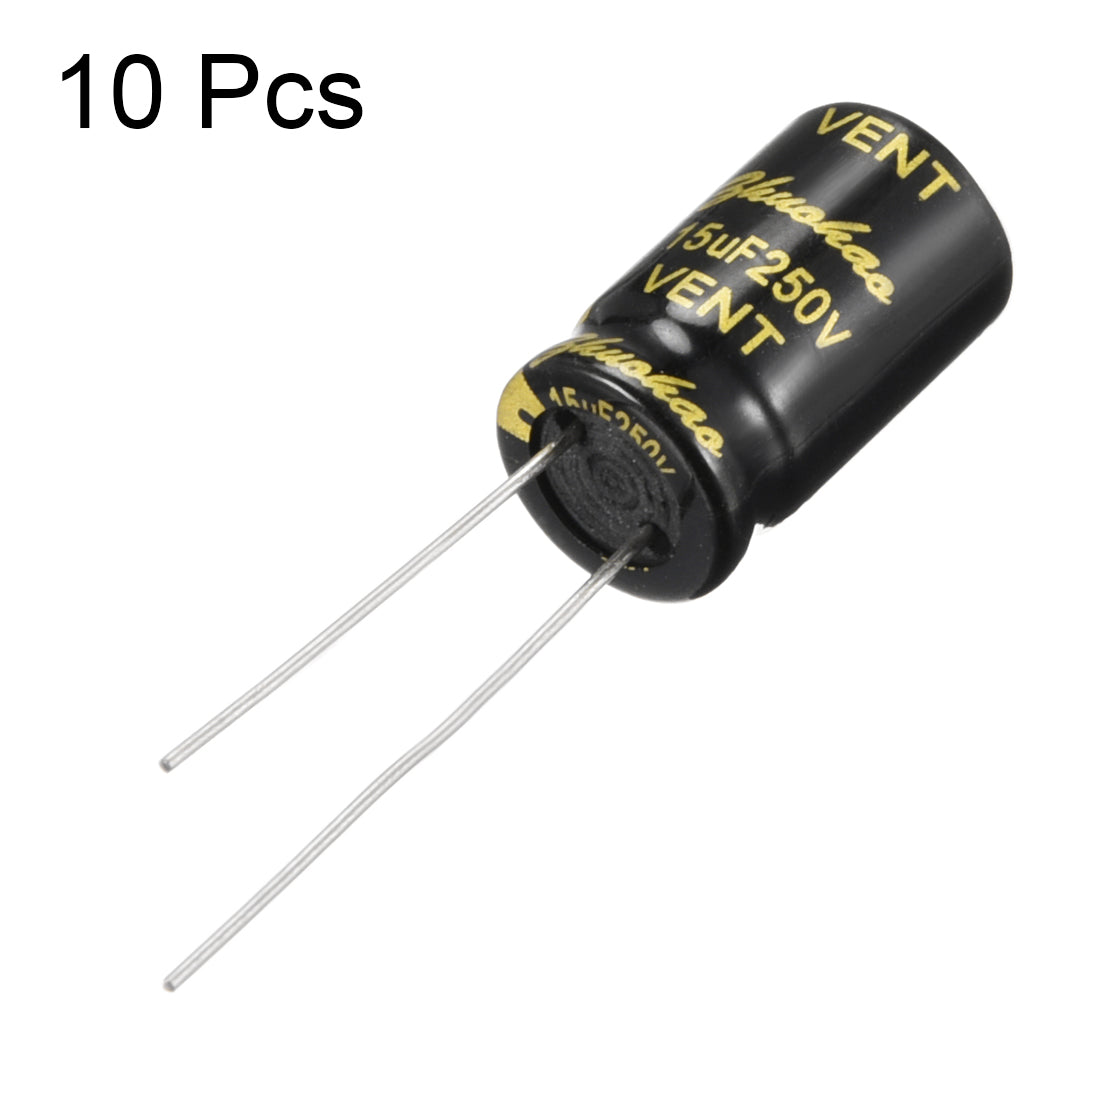 uxcell Uxcell Aluminum Radial Electrolytic Capacitor with 15uF 250V 105 Celsius Life 2000H 10 x 17 mm Black 10pcs